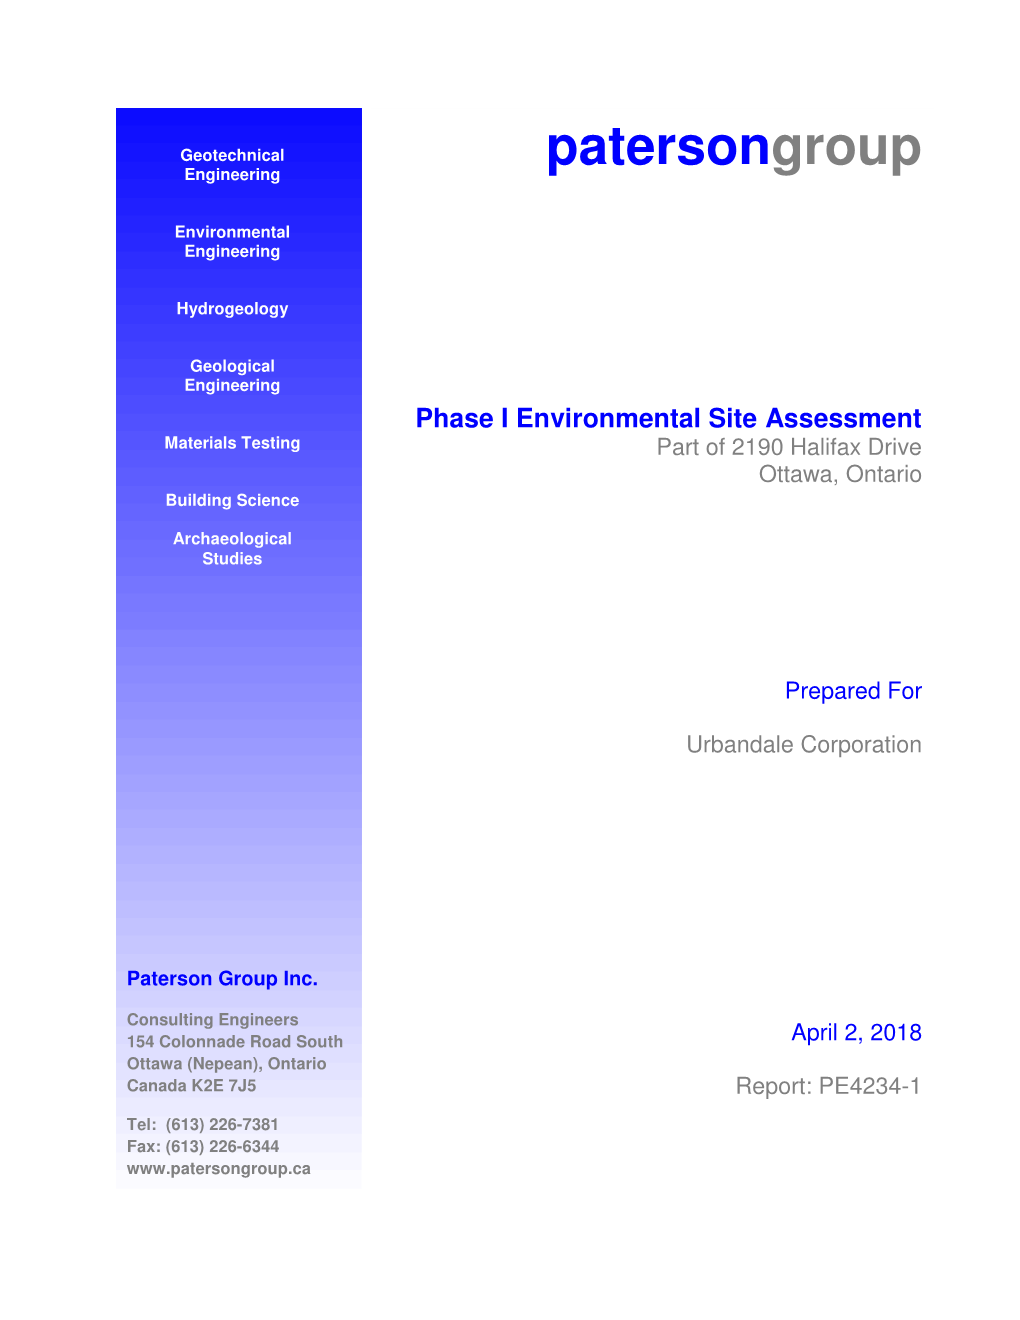 Patersongroup Engineering +Fbrownfield